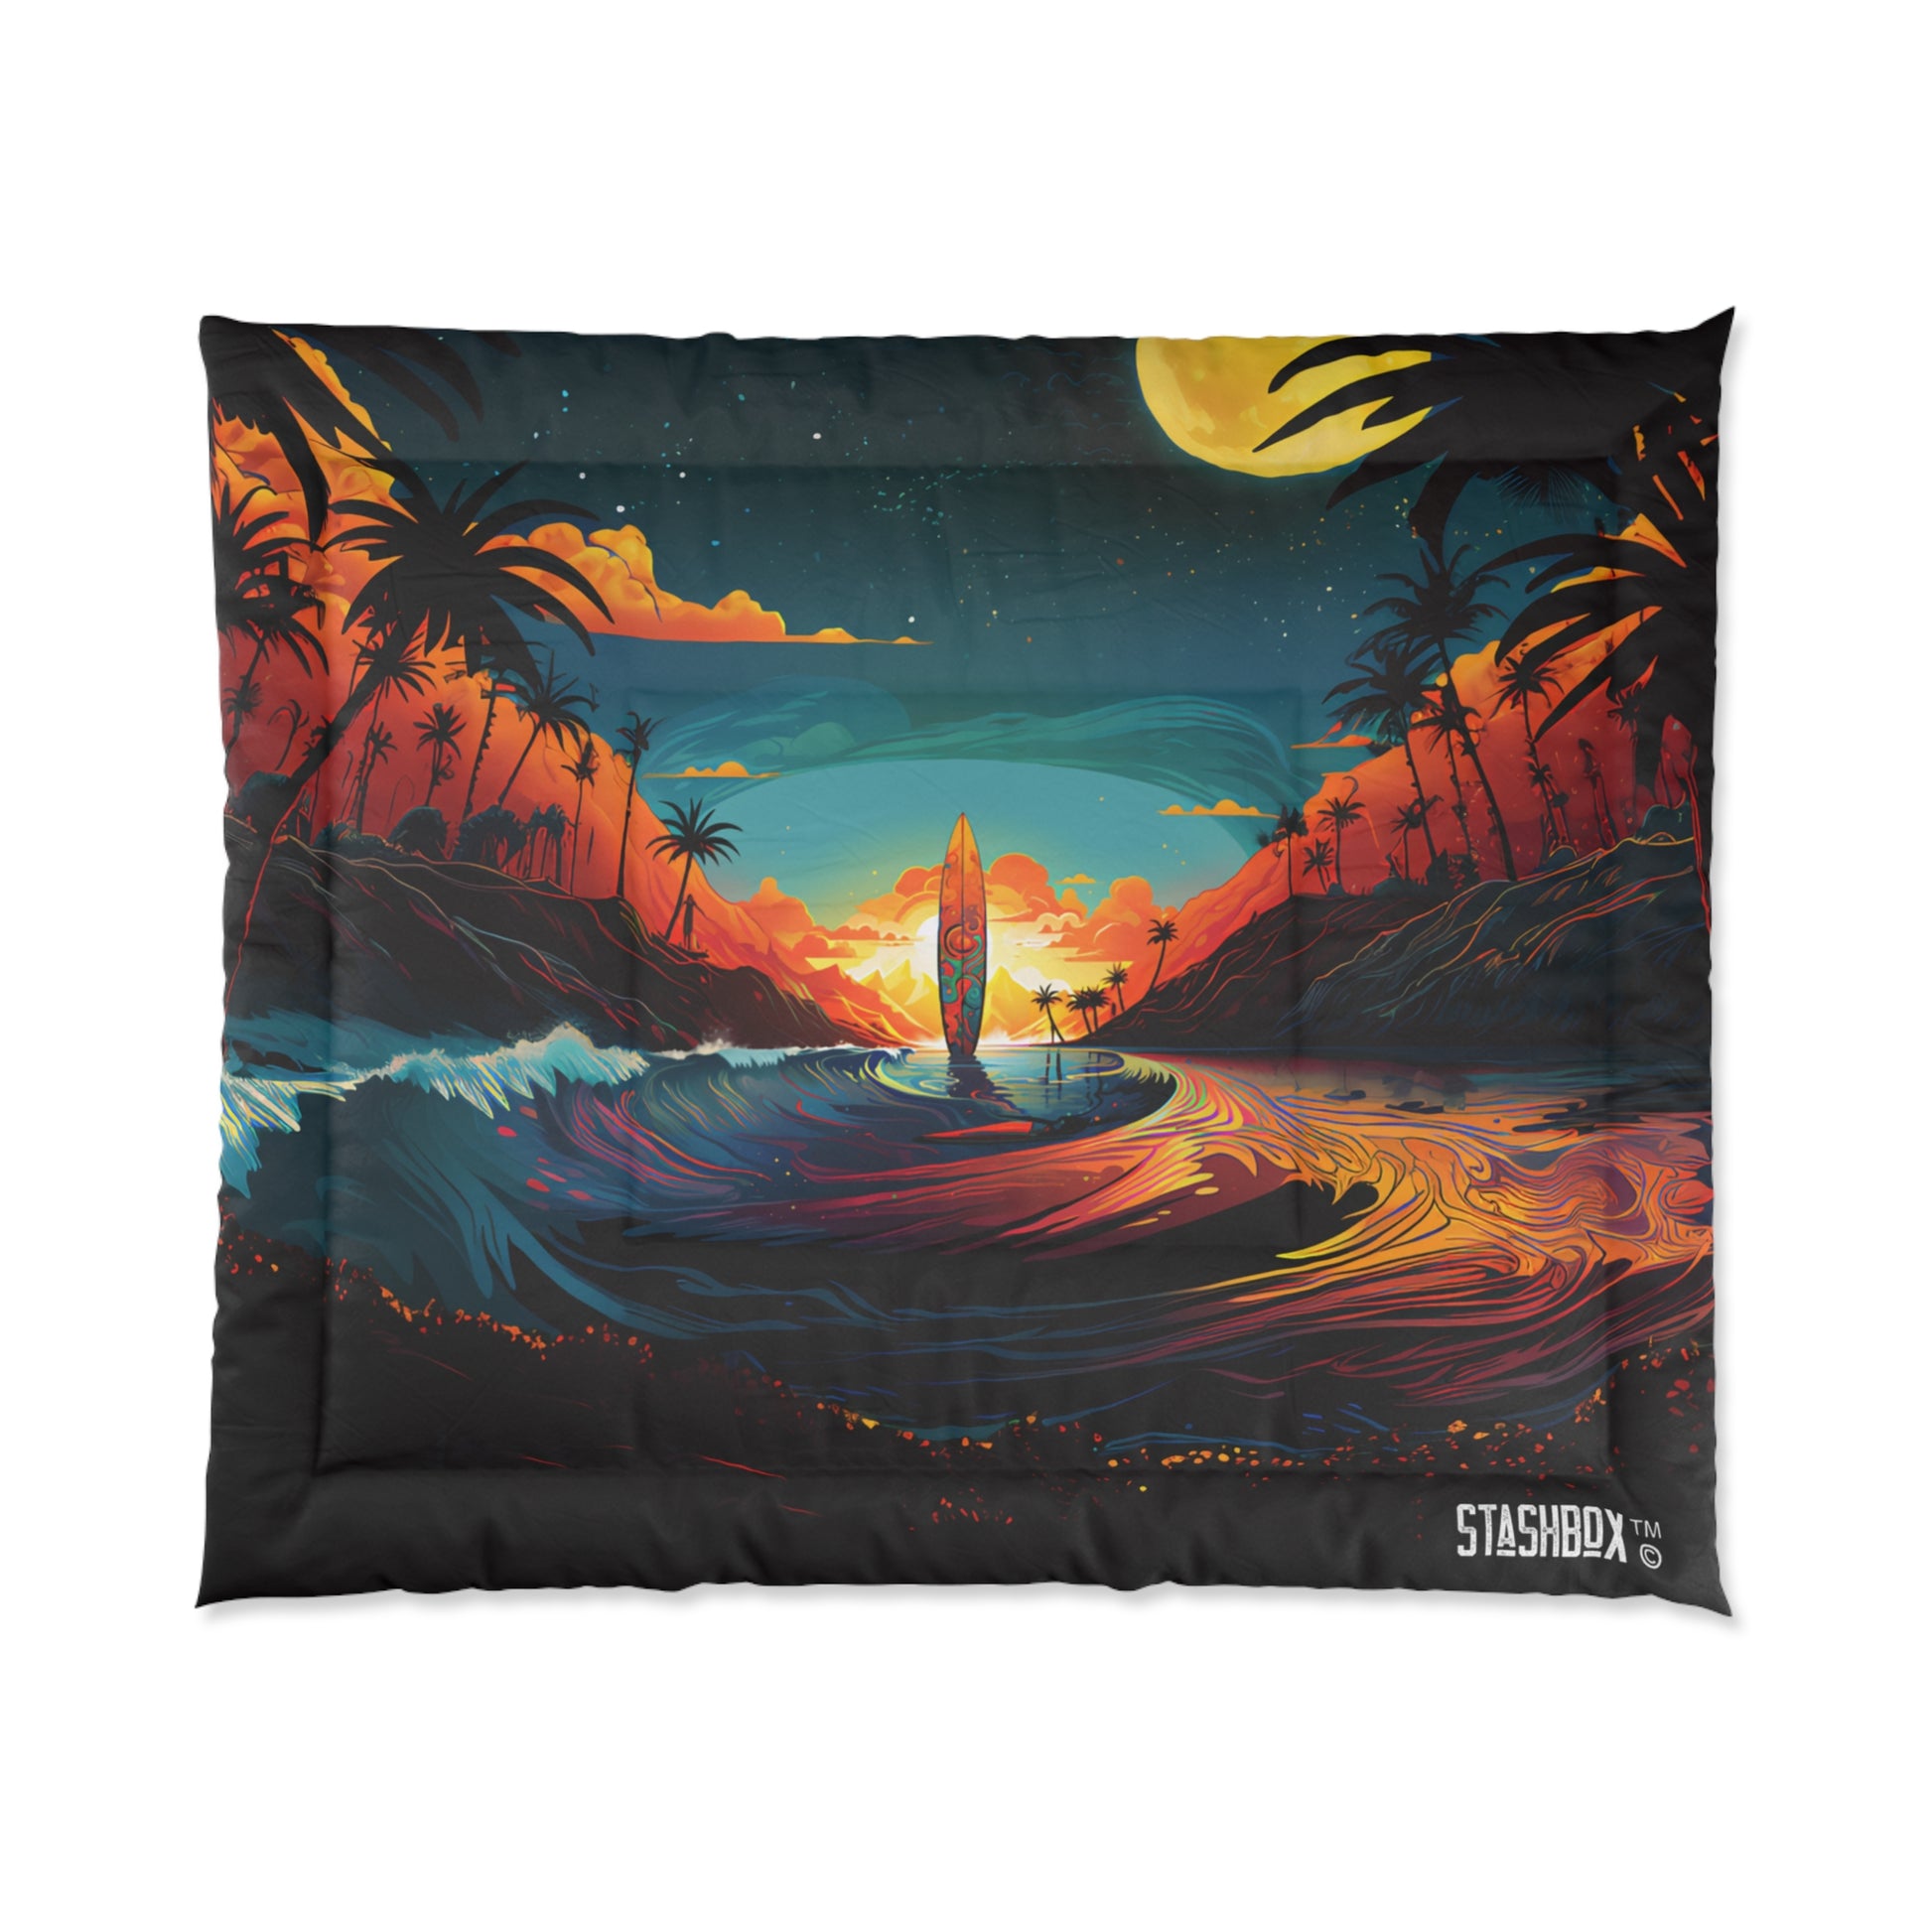 Dreamy Surfboard Sunset: Surfboards Design #001 Comforter. Drift into the tranquil allure of a beach sunset with this cozy comforter, featuring a stunning surfboard-themed design. Bring beach vibes to your bedroom. #BeachSunsetDreams #SurfboardMagic #StashboxDesign